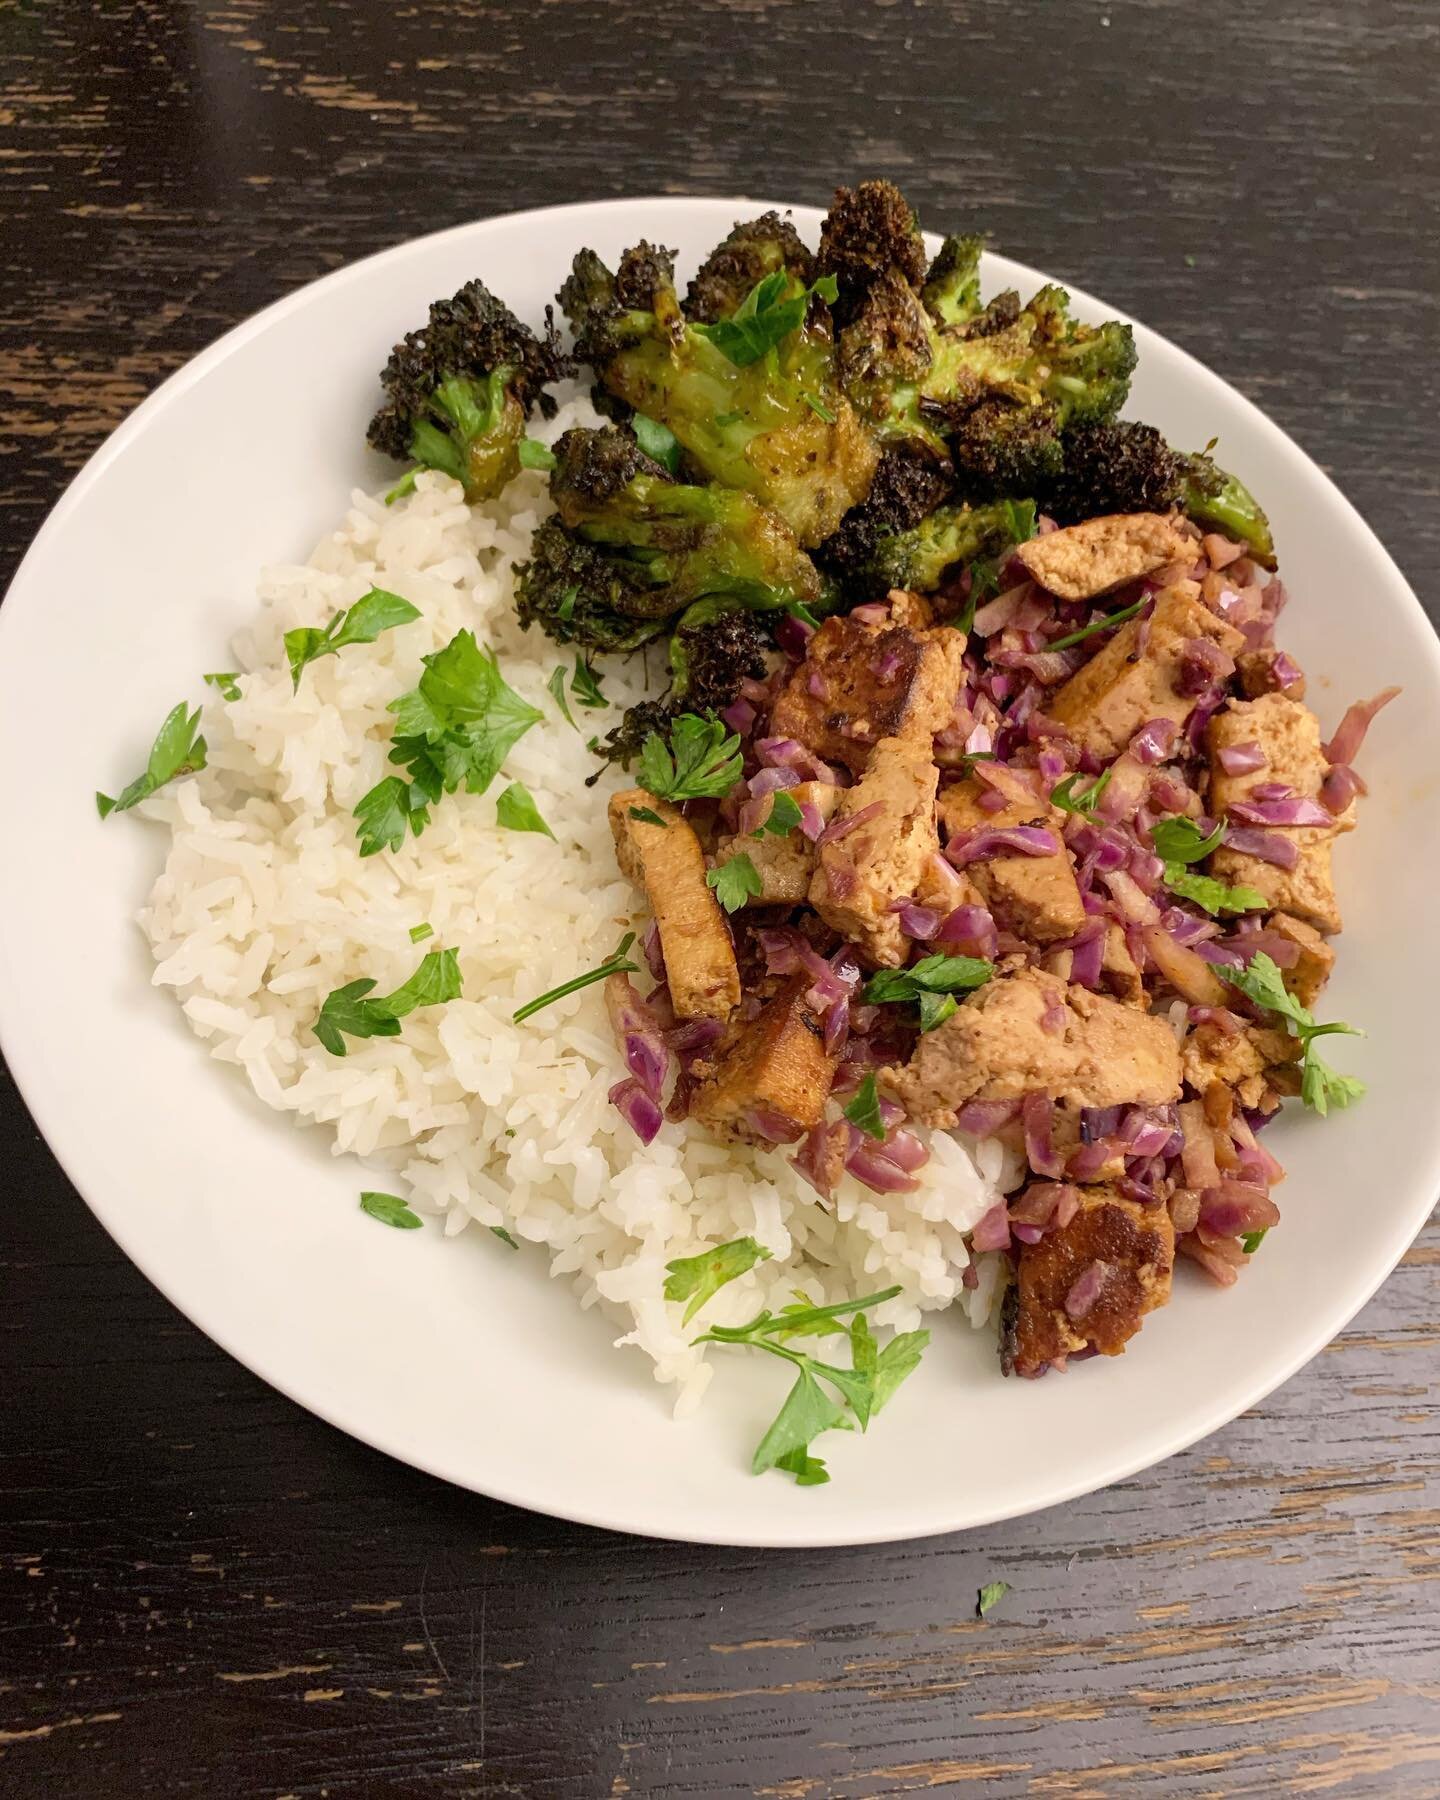 Simple tofu rice bowl! I used the marinade from my tofu bulgogi and added some sautéed red cabbage and roasted broccoli tossed in @mikeshothoney! This was so good. A tutorial for how I do my tofu is in my story and will stay in my highlights. I hope